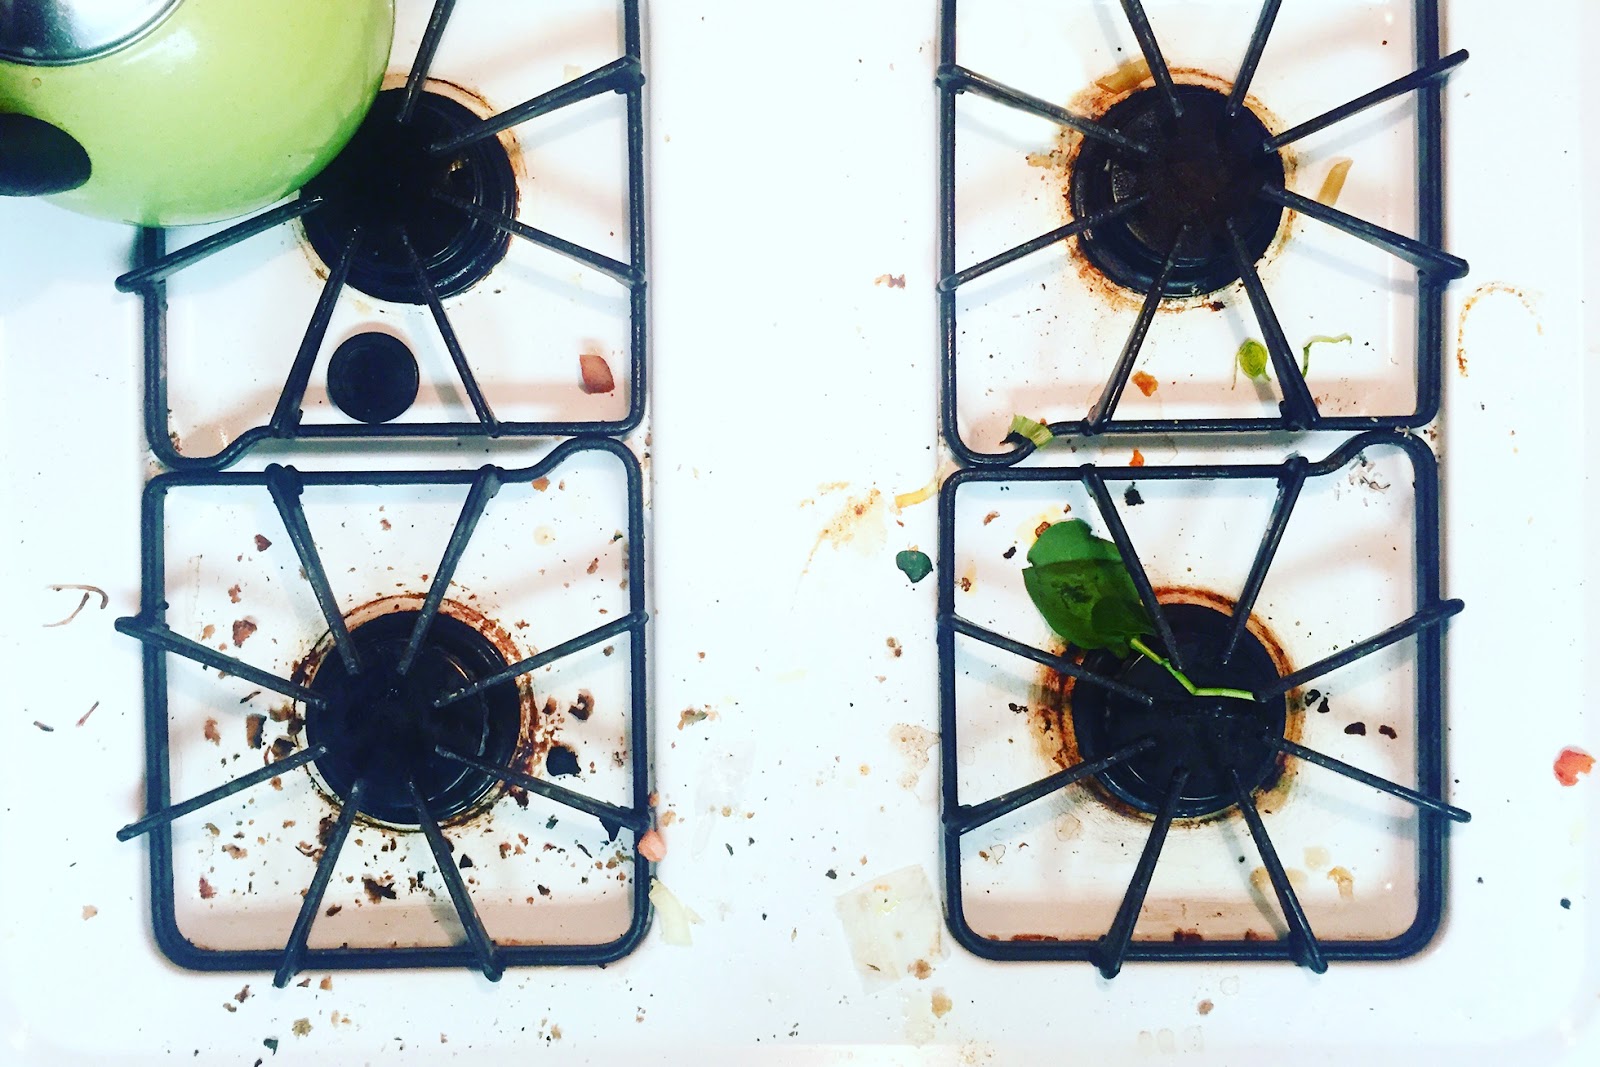 A gas stovetop with food crumbs, green teapot